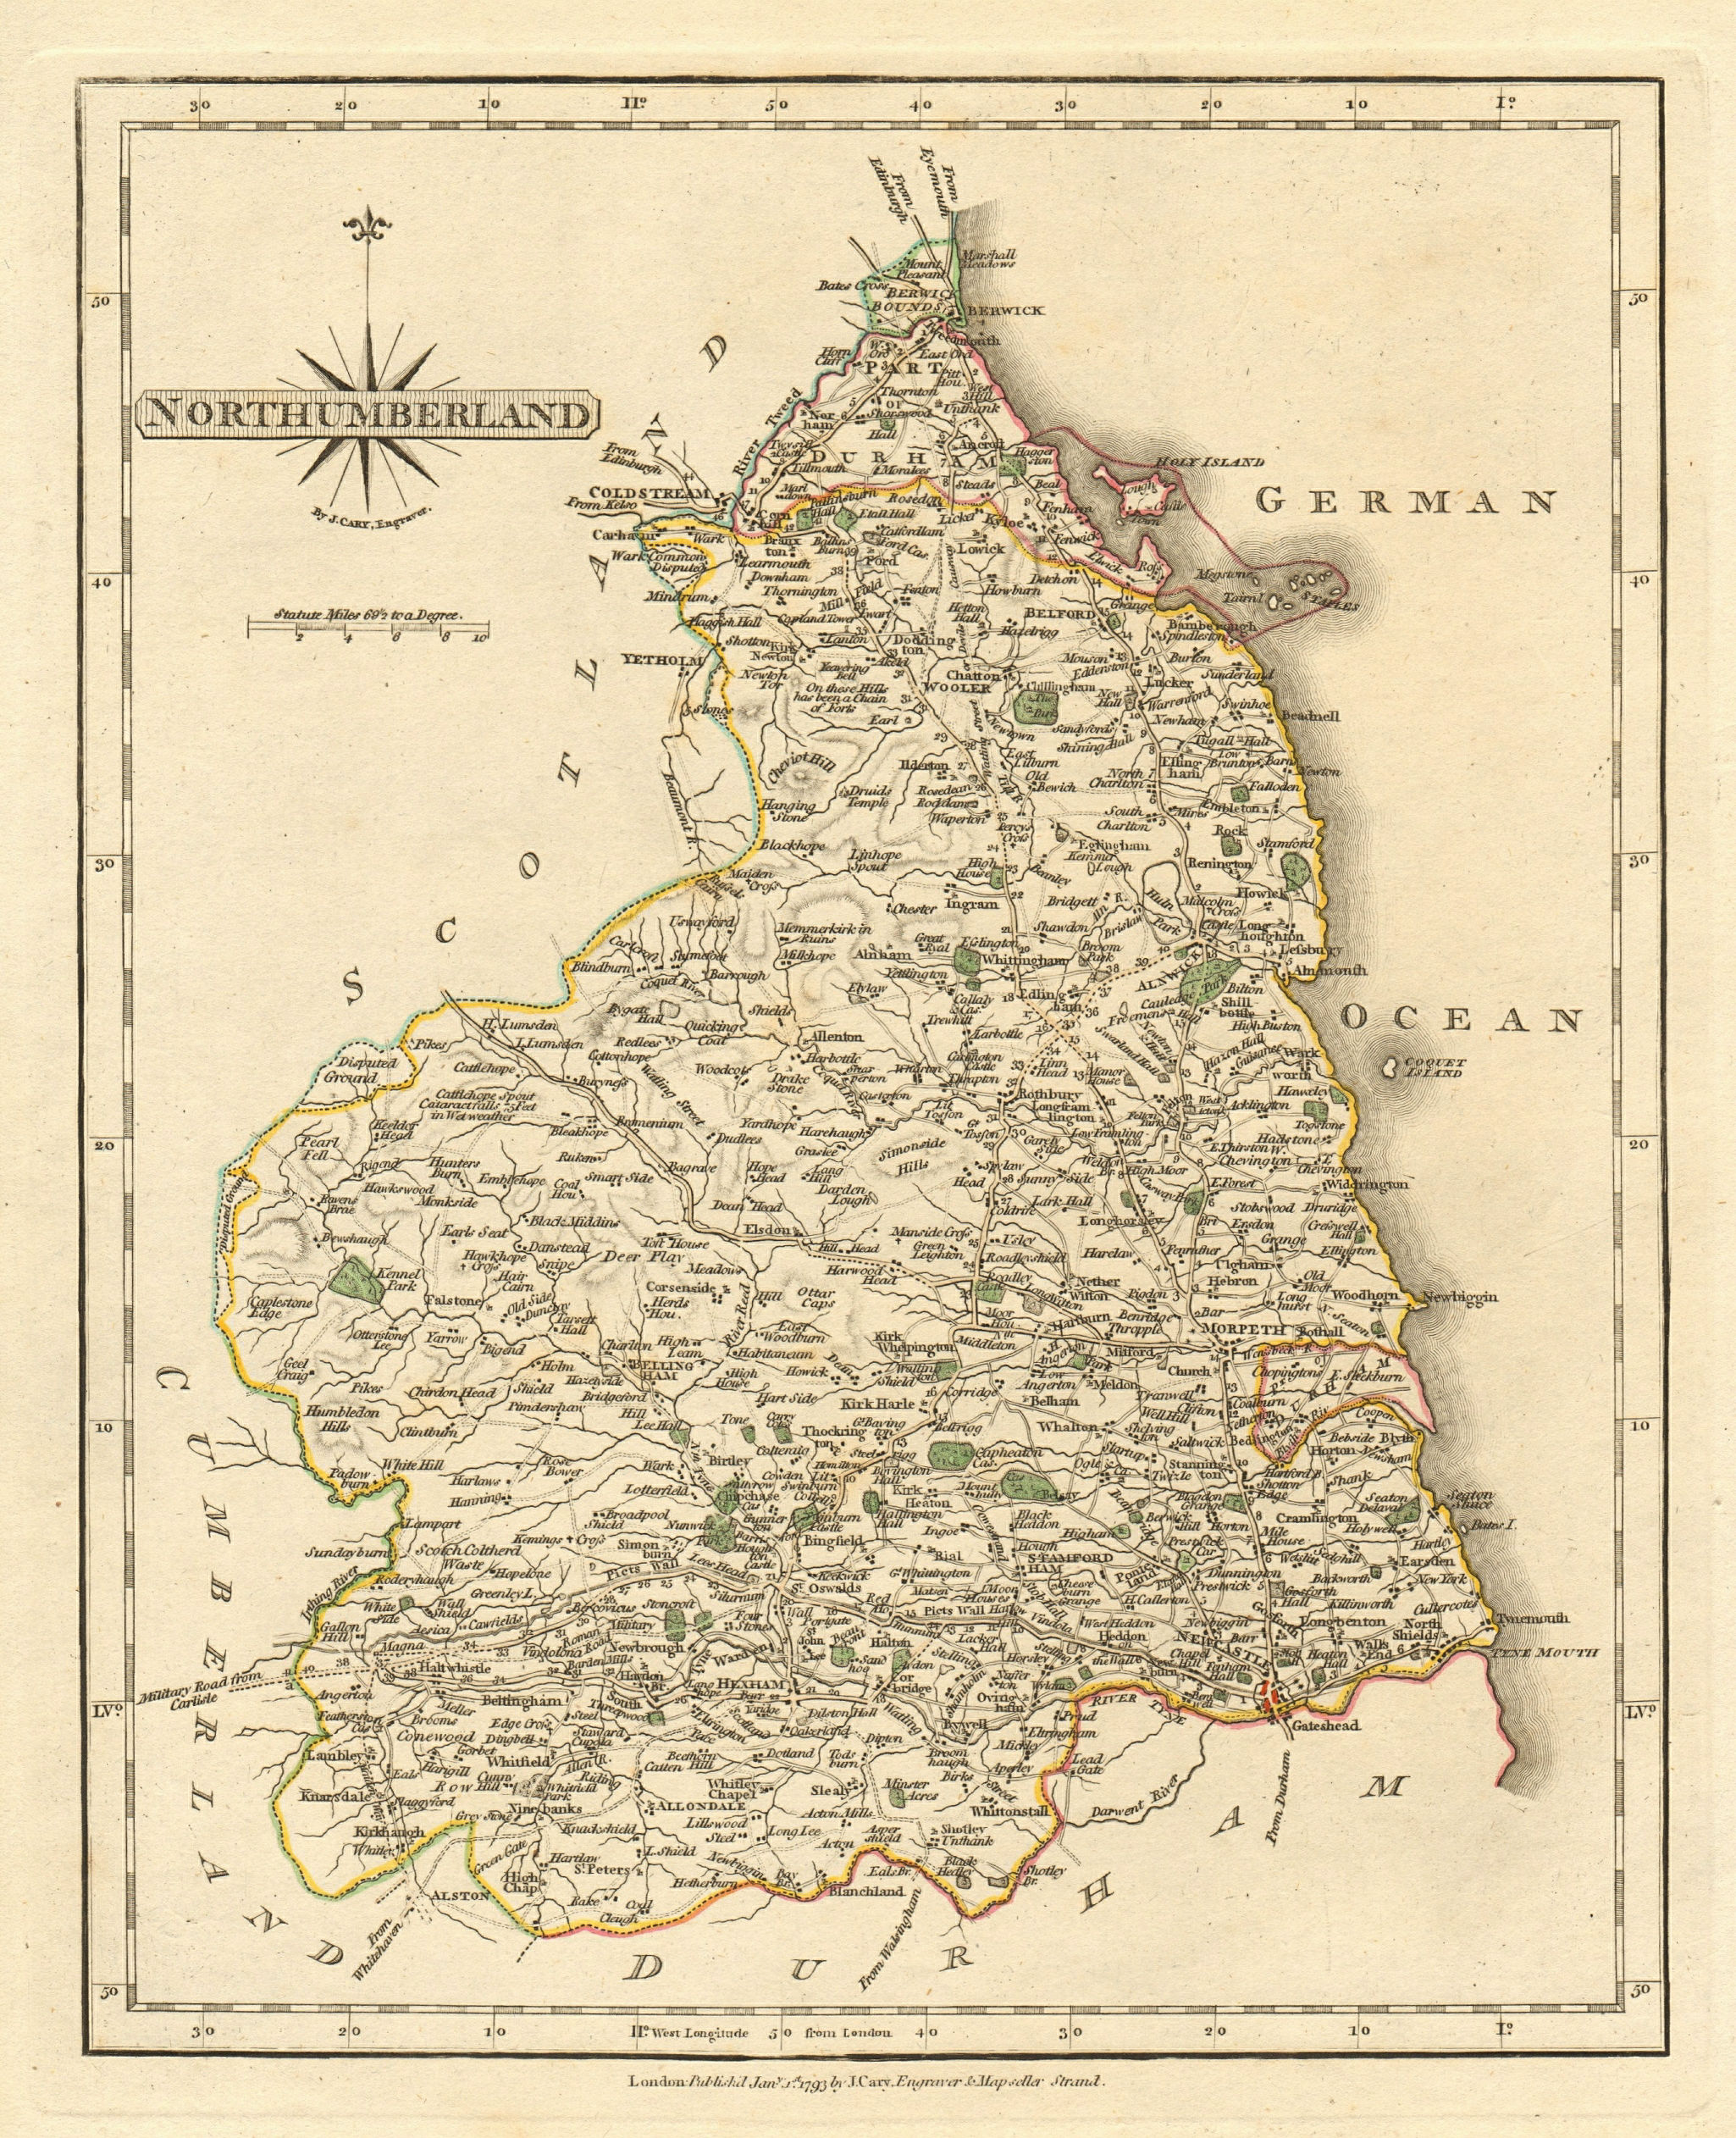 Associate Product Antique county map of NORTHUMBERLAND by JOHN CARY. Original outline colour 1793